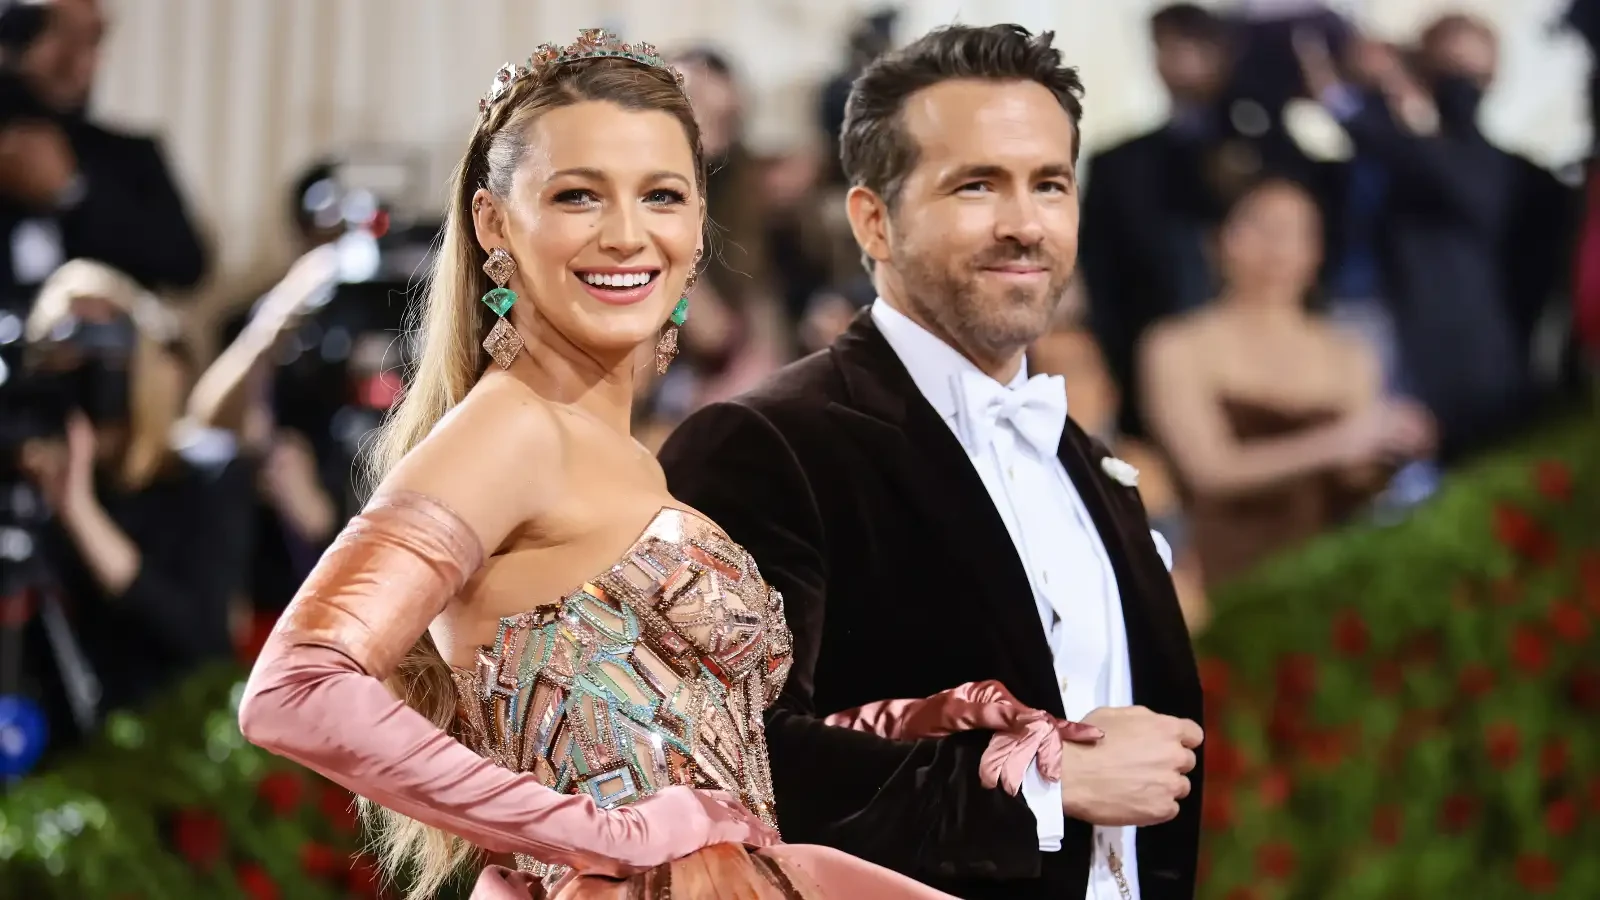 Blake Lively and Ryan Reynolds are a match made in heaven